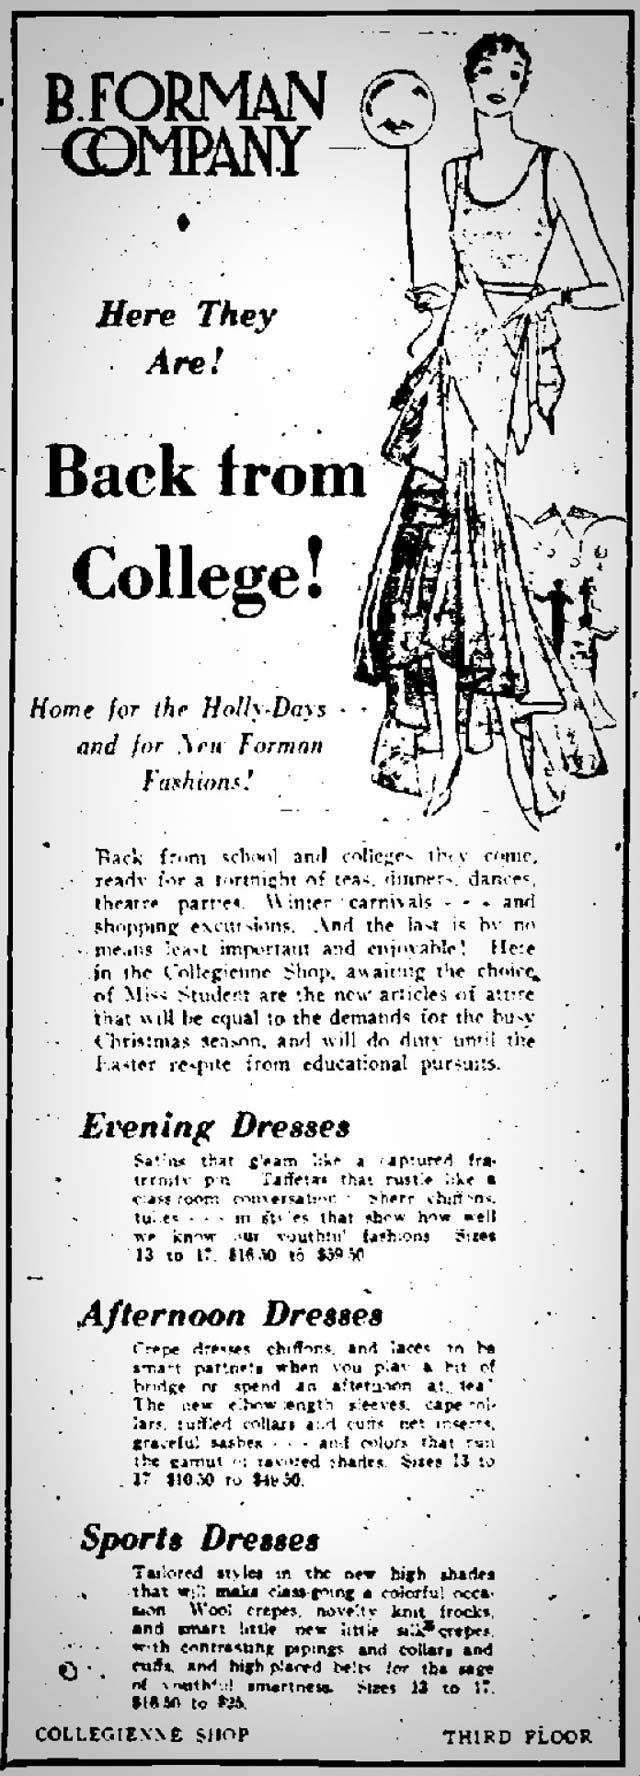 B. Forman Co. advertisment in the Democrat and Chronicle, December 22, 1929. [SOURCE: FultonHistory.com]